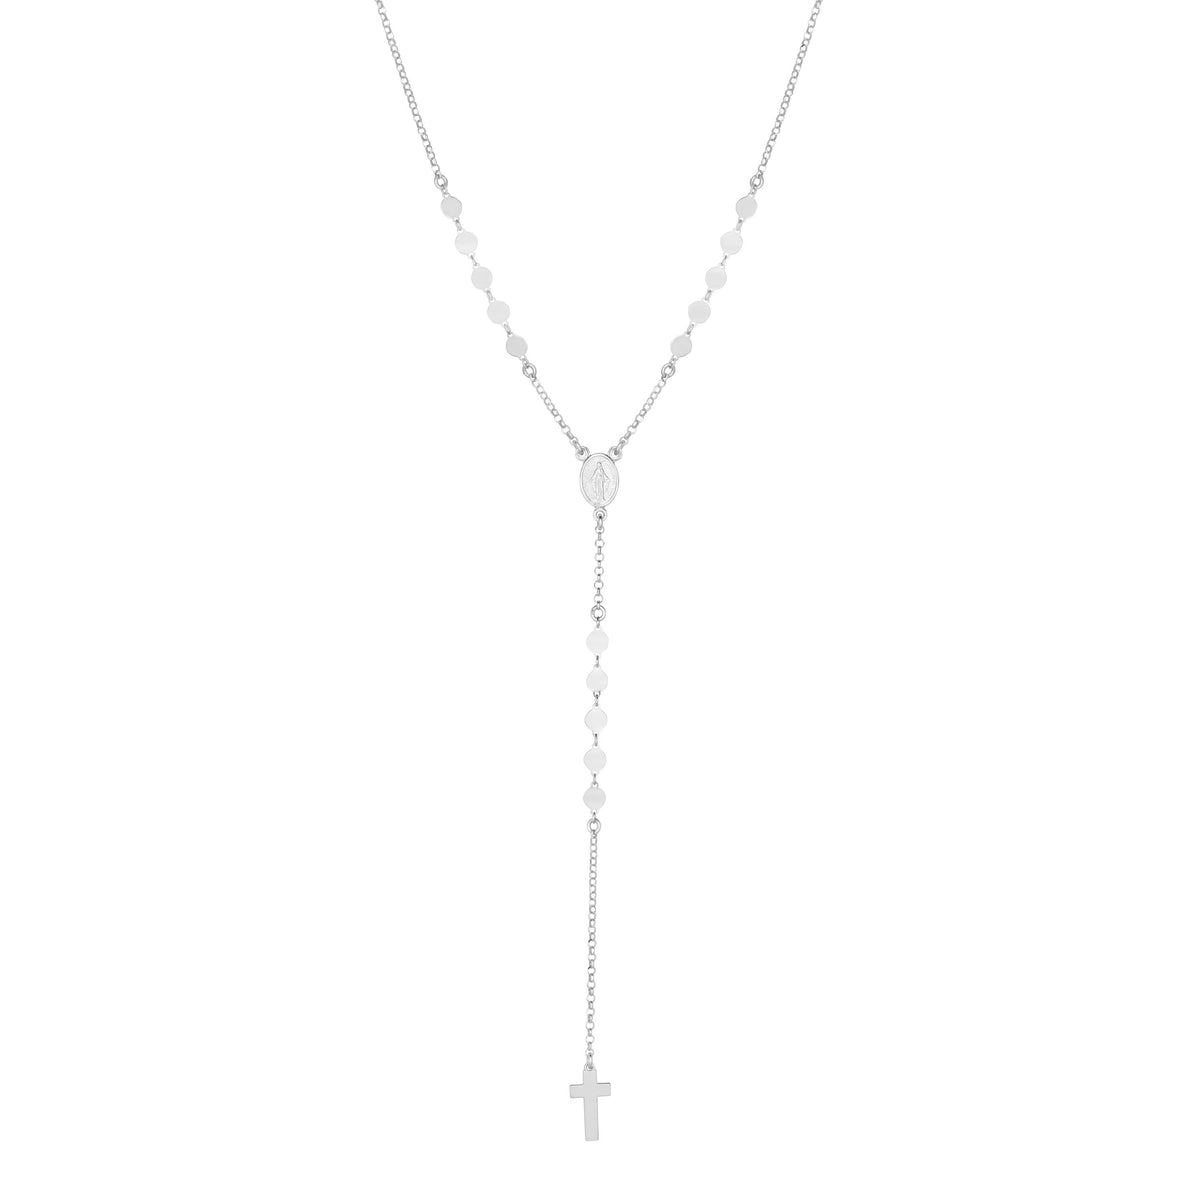 Sterling Silver Religious Cross Chain Necklace, 24" fine designer jewelry for men and women